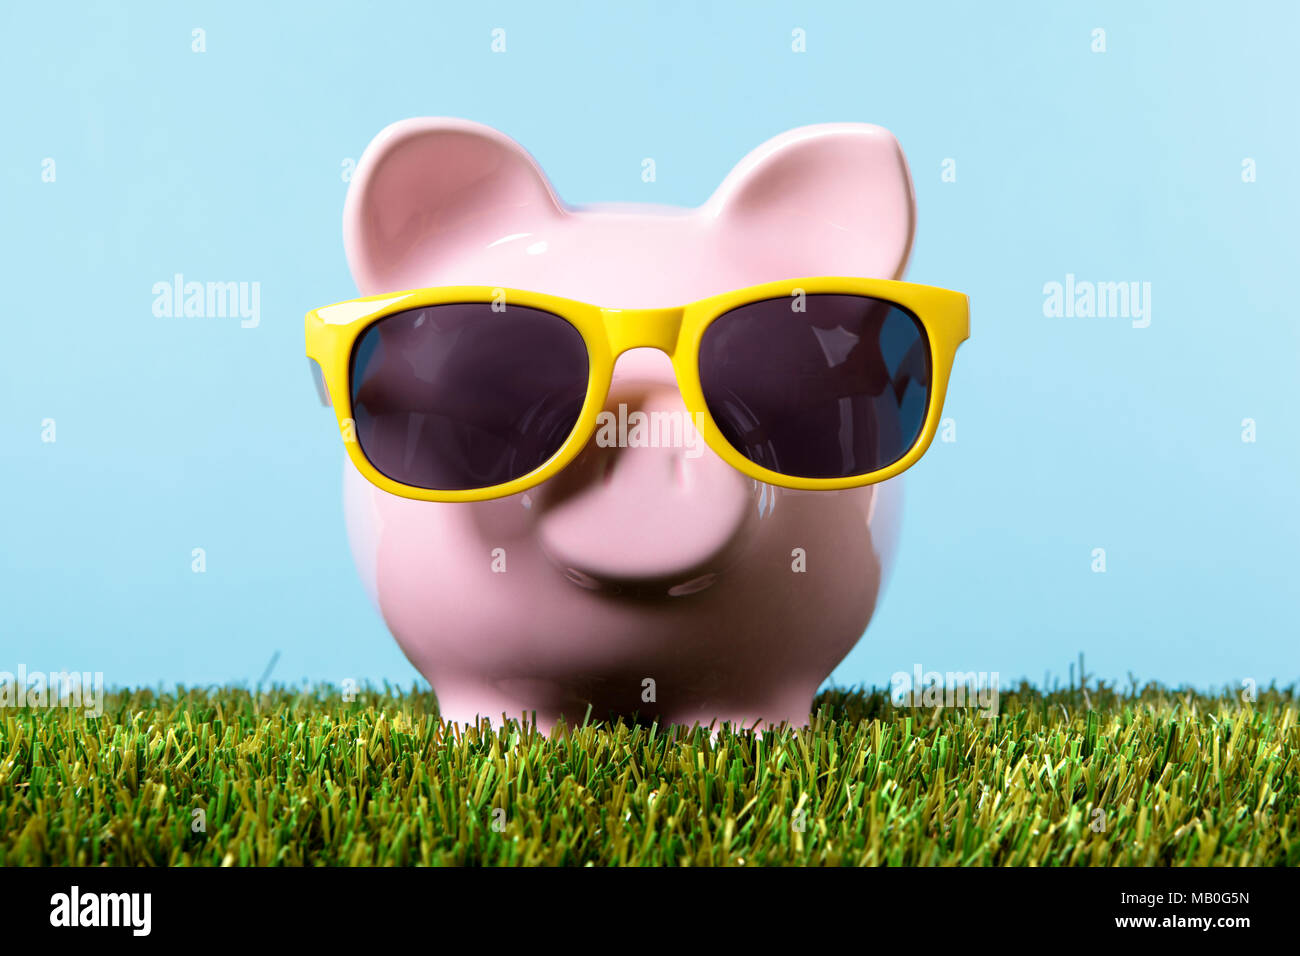 Piggy bank on summer vacation with yellow sunglasses and green field Stock Photo